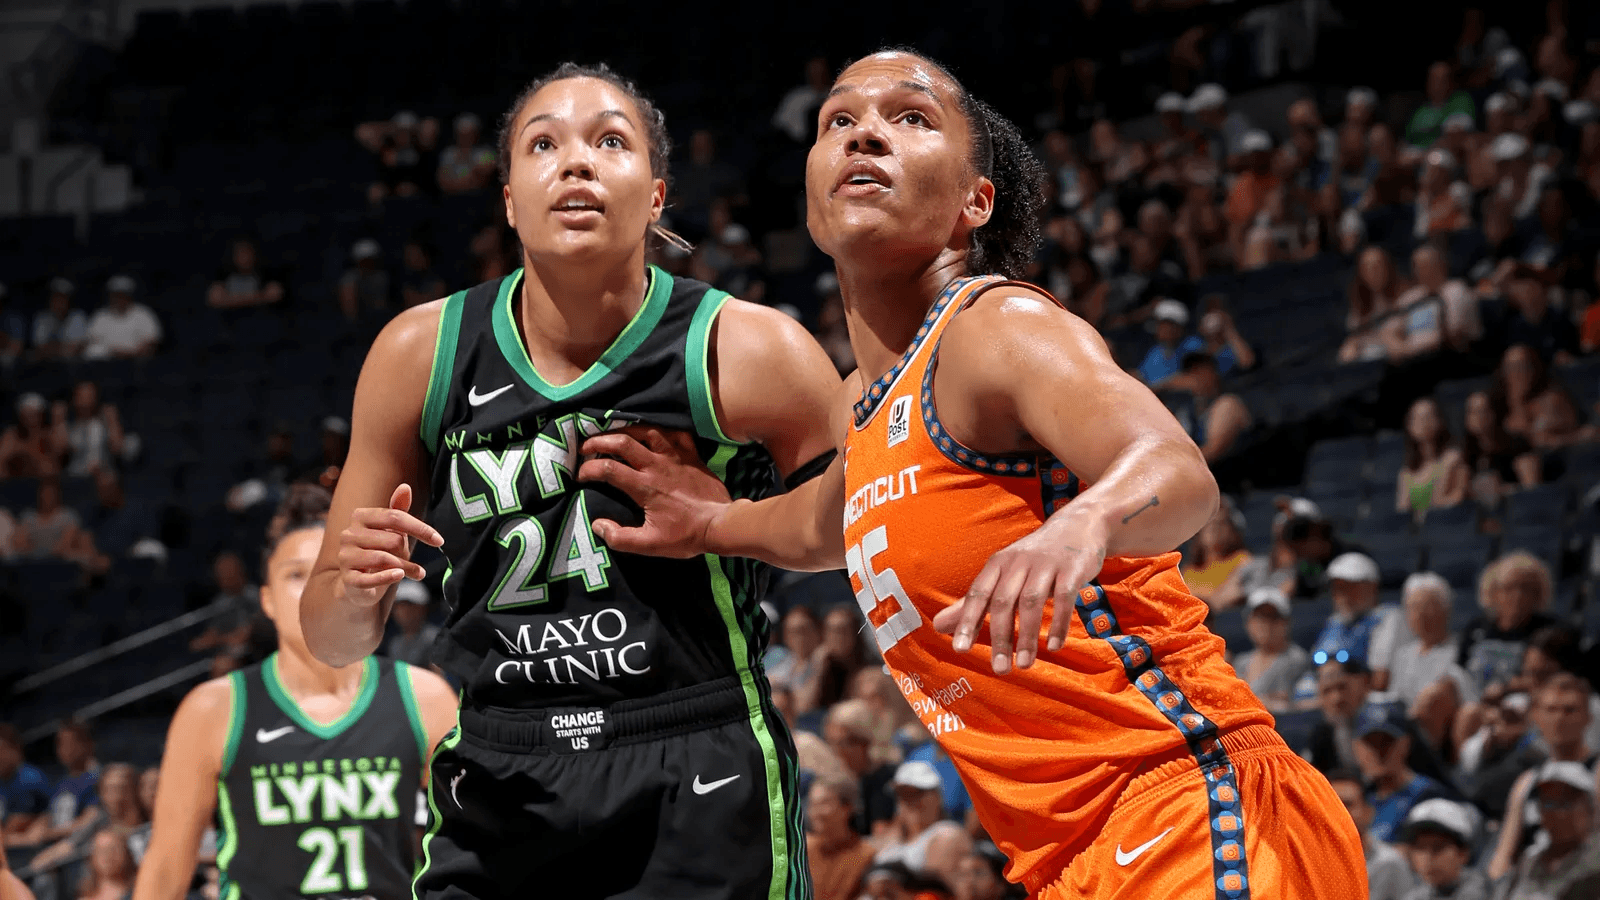 Minnesota Lynx vs Connecticut Sun Game 2: Preview, Odds & Best Bets